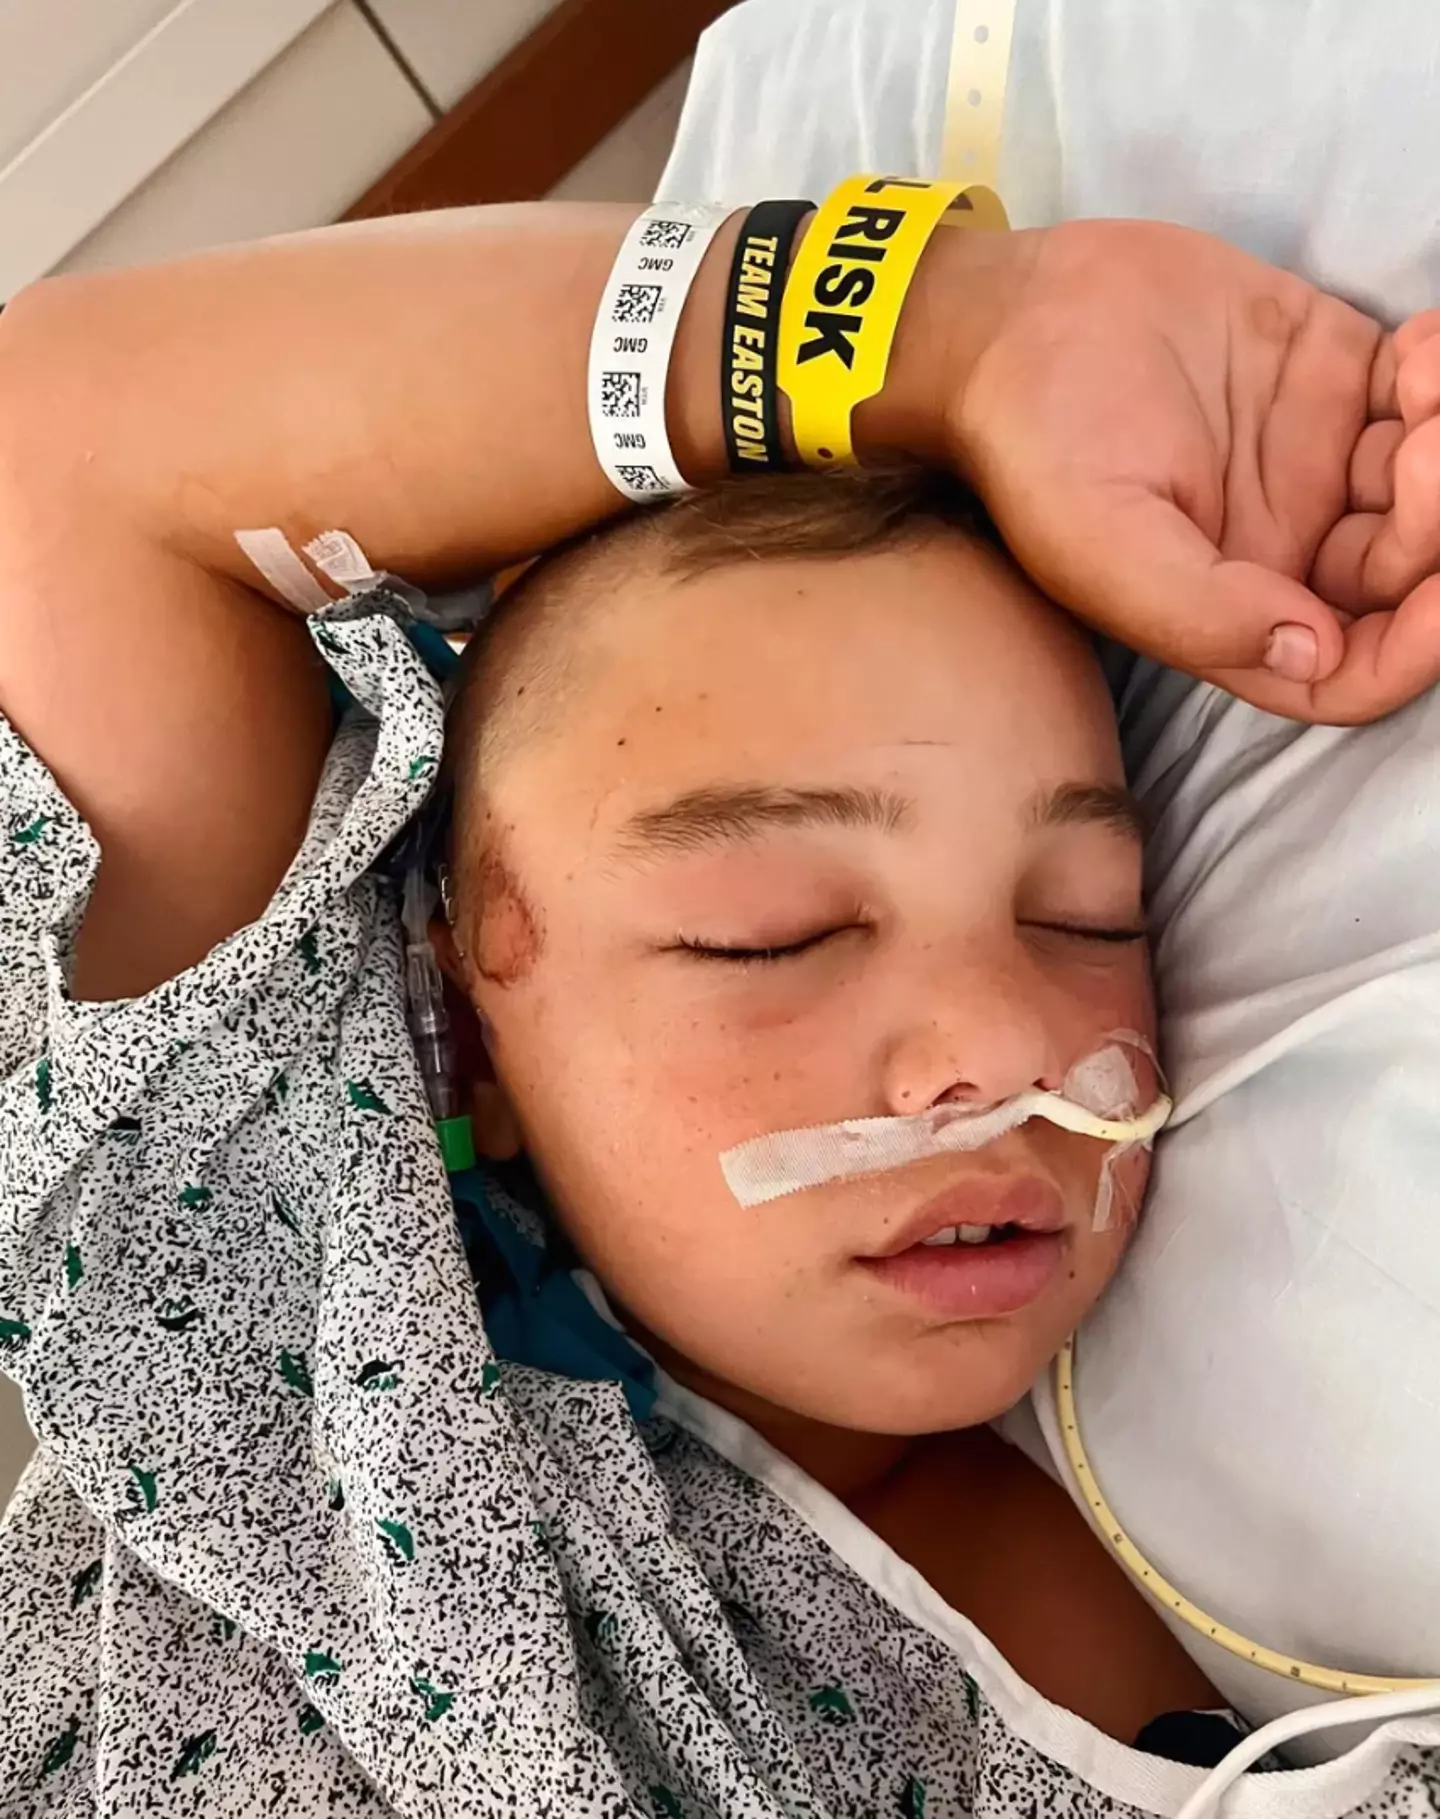 Easton ‘Tank’ Oliverson was minutes away from dying when he fell from a bunk bed and fractured his skull.